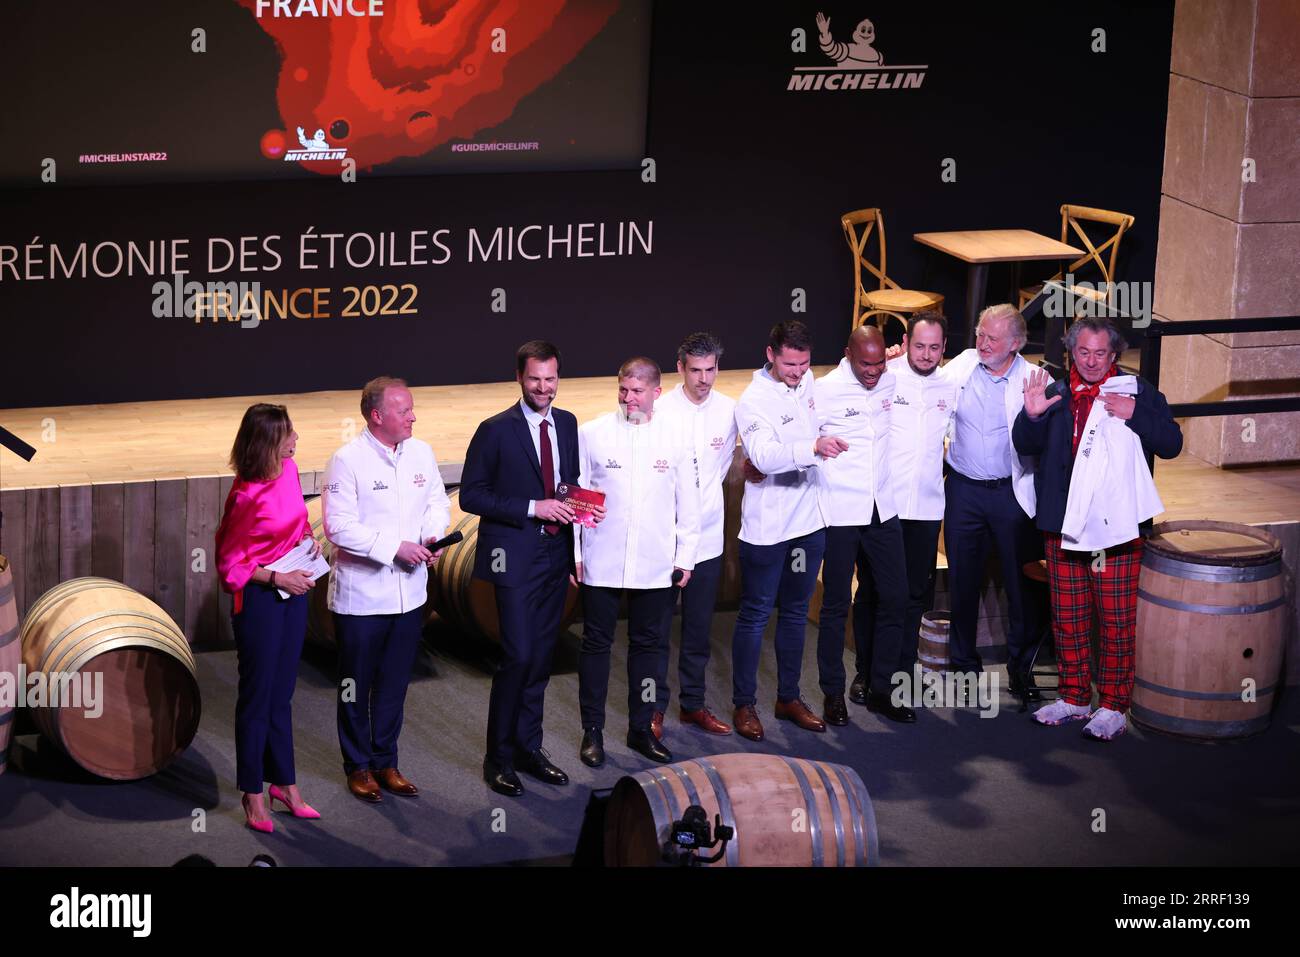 220323 -- COGNAC, March 23, 2022 -- Chefs celebrate after being awarded a second Michelin star during the 2022 edition of the Michelin Guide award ceremony in Cognac, France, March 22, 2022. The Michelin Guide launched its 2022 edition on Tuesday in Cognac, the first time in its 122 years the ceremony has taken place outside Paris. Two restaurants were awarded the highest distinction of three stars.  FRANCE-COGNAC-MICHELIN GUIDE-AWARD CEREMONY GaoxJing PUBLICATIONxNOTxINxCHN Stock Photo